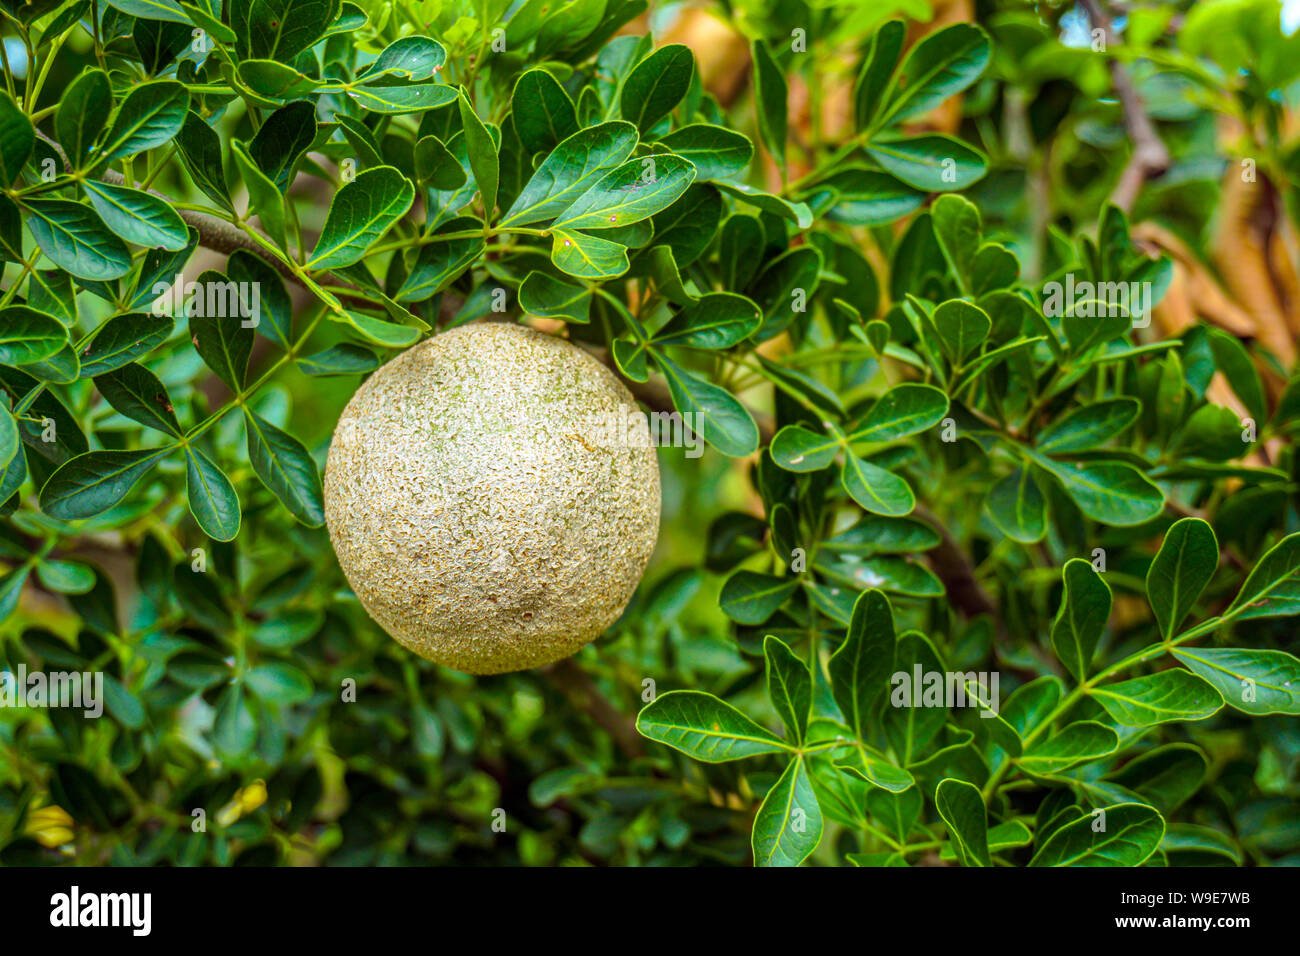 The wood apple (Limoniaacidissima) is a fruit, which has other names like elephant apple. Stock Photo